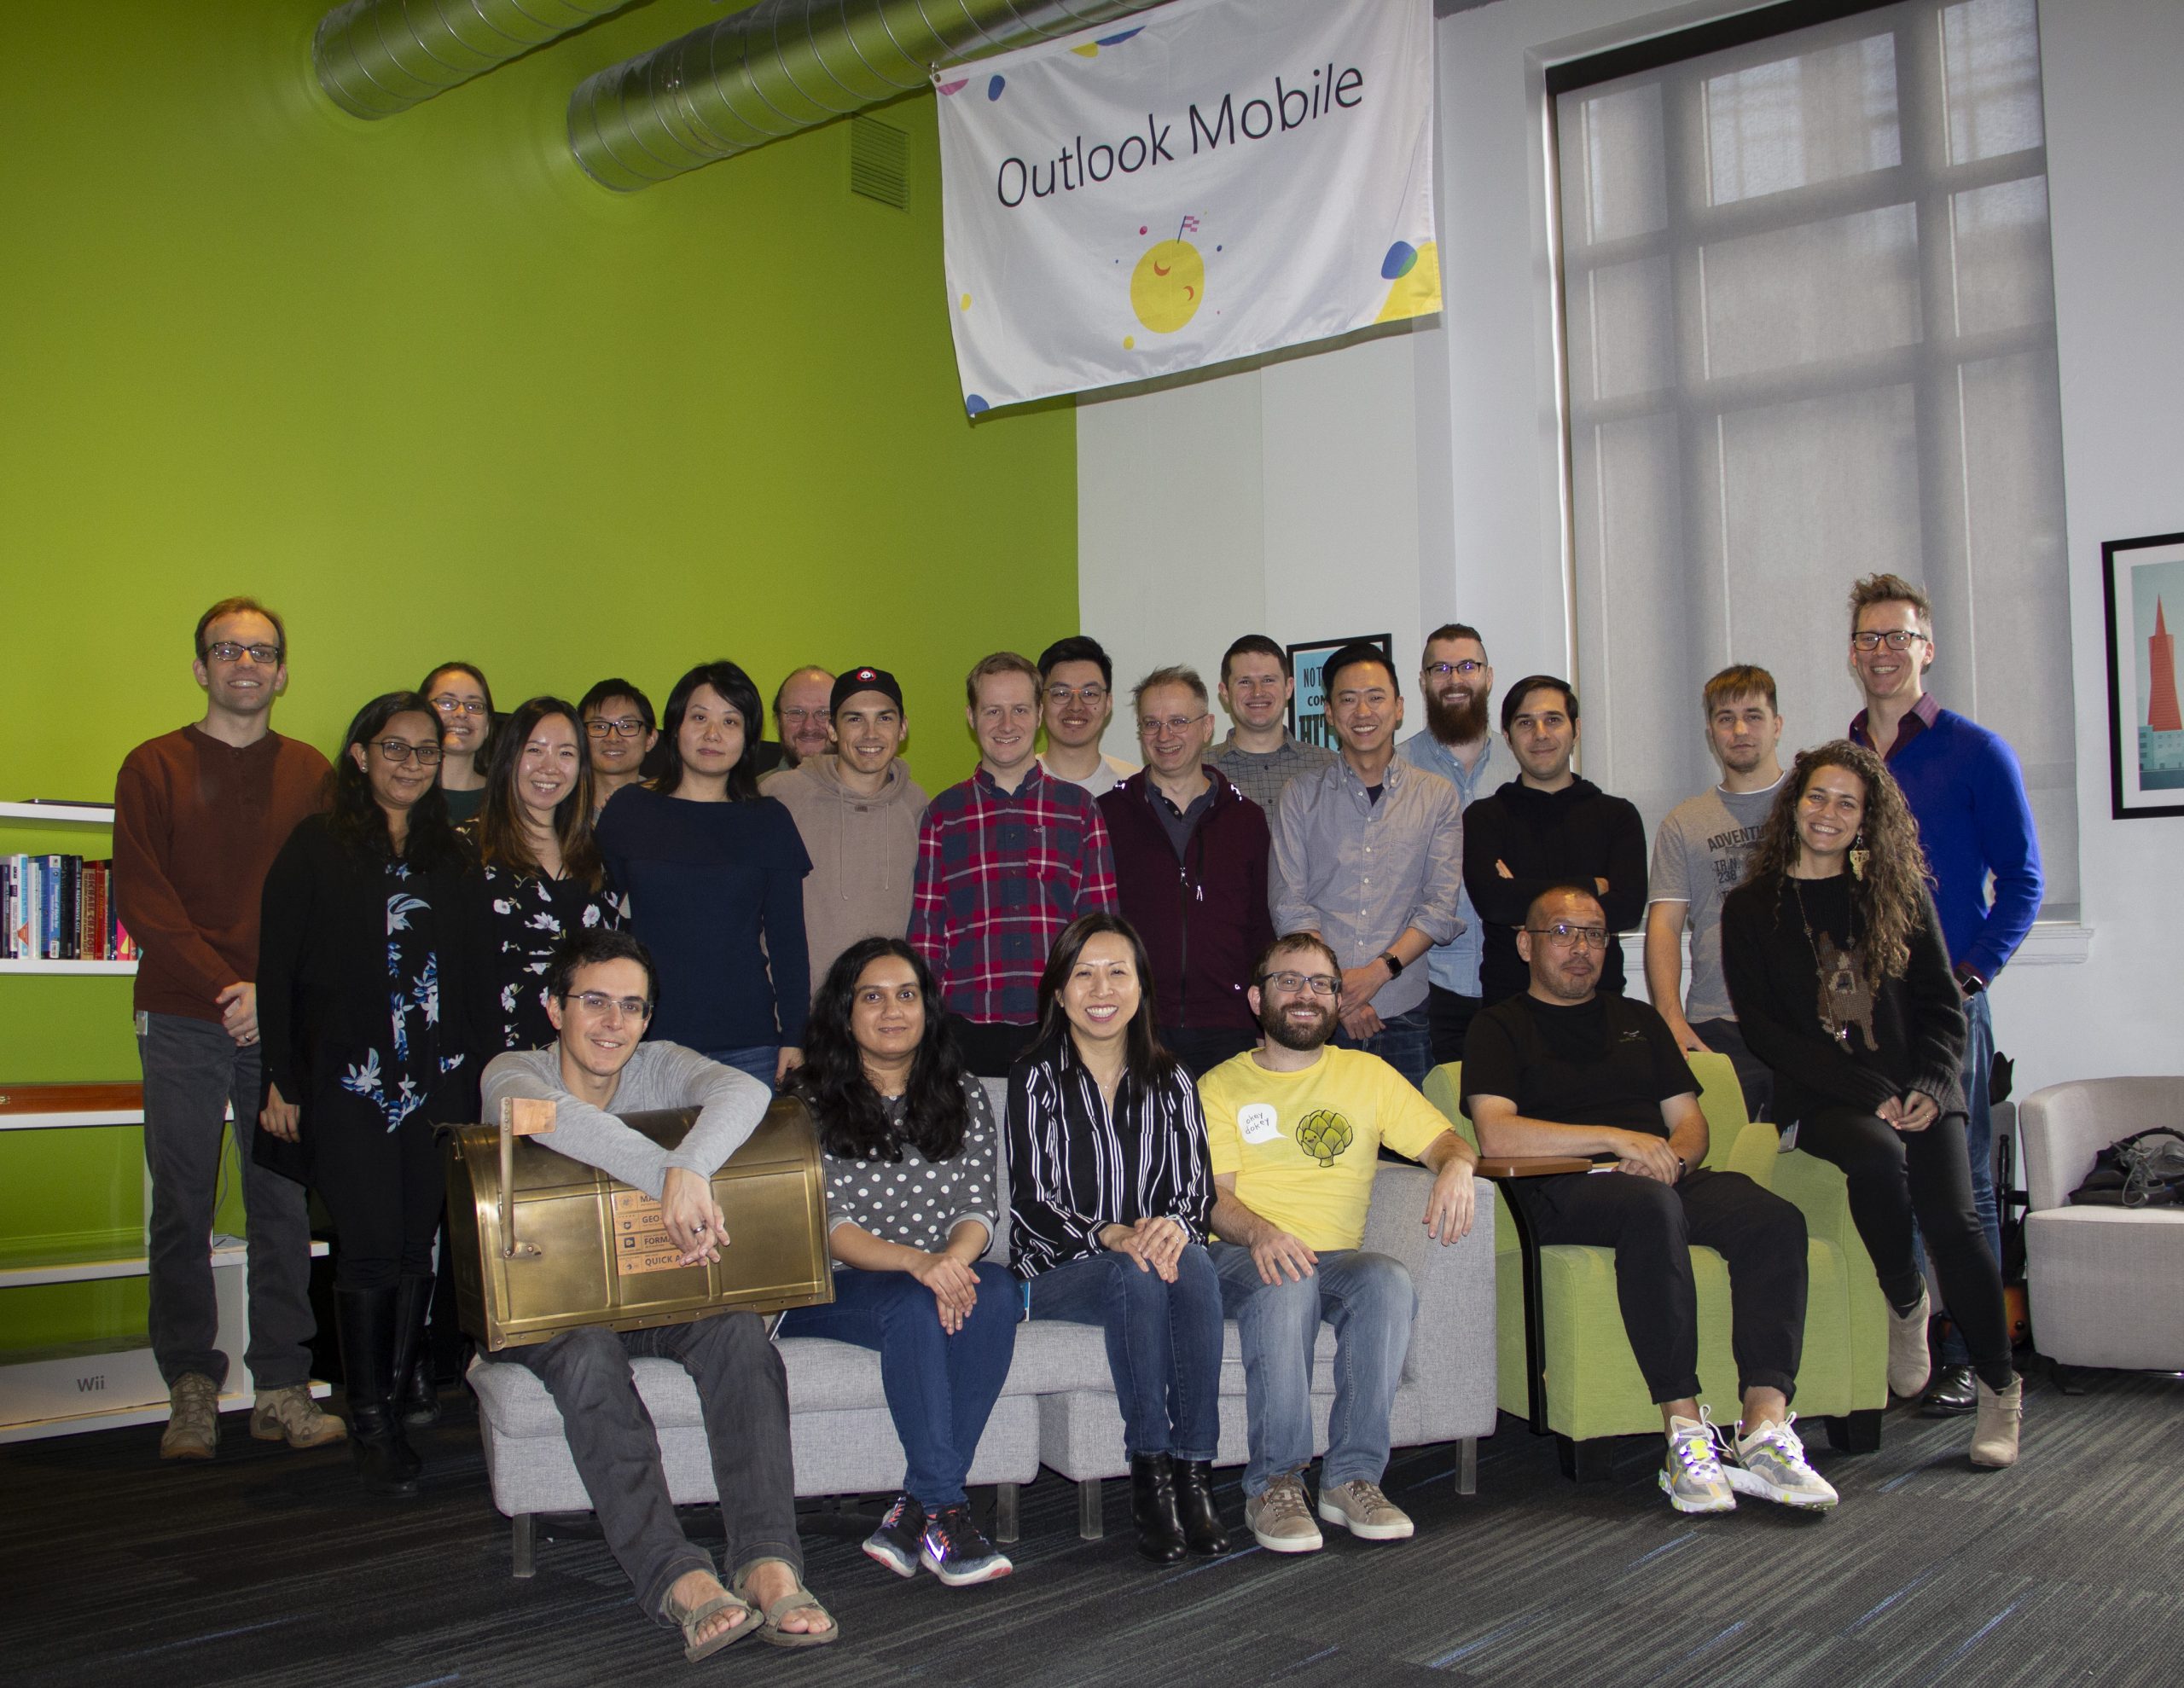 The Outlook Mobile team in the Bay Area